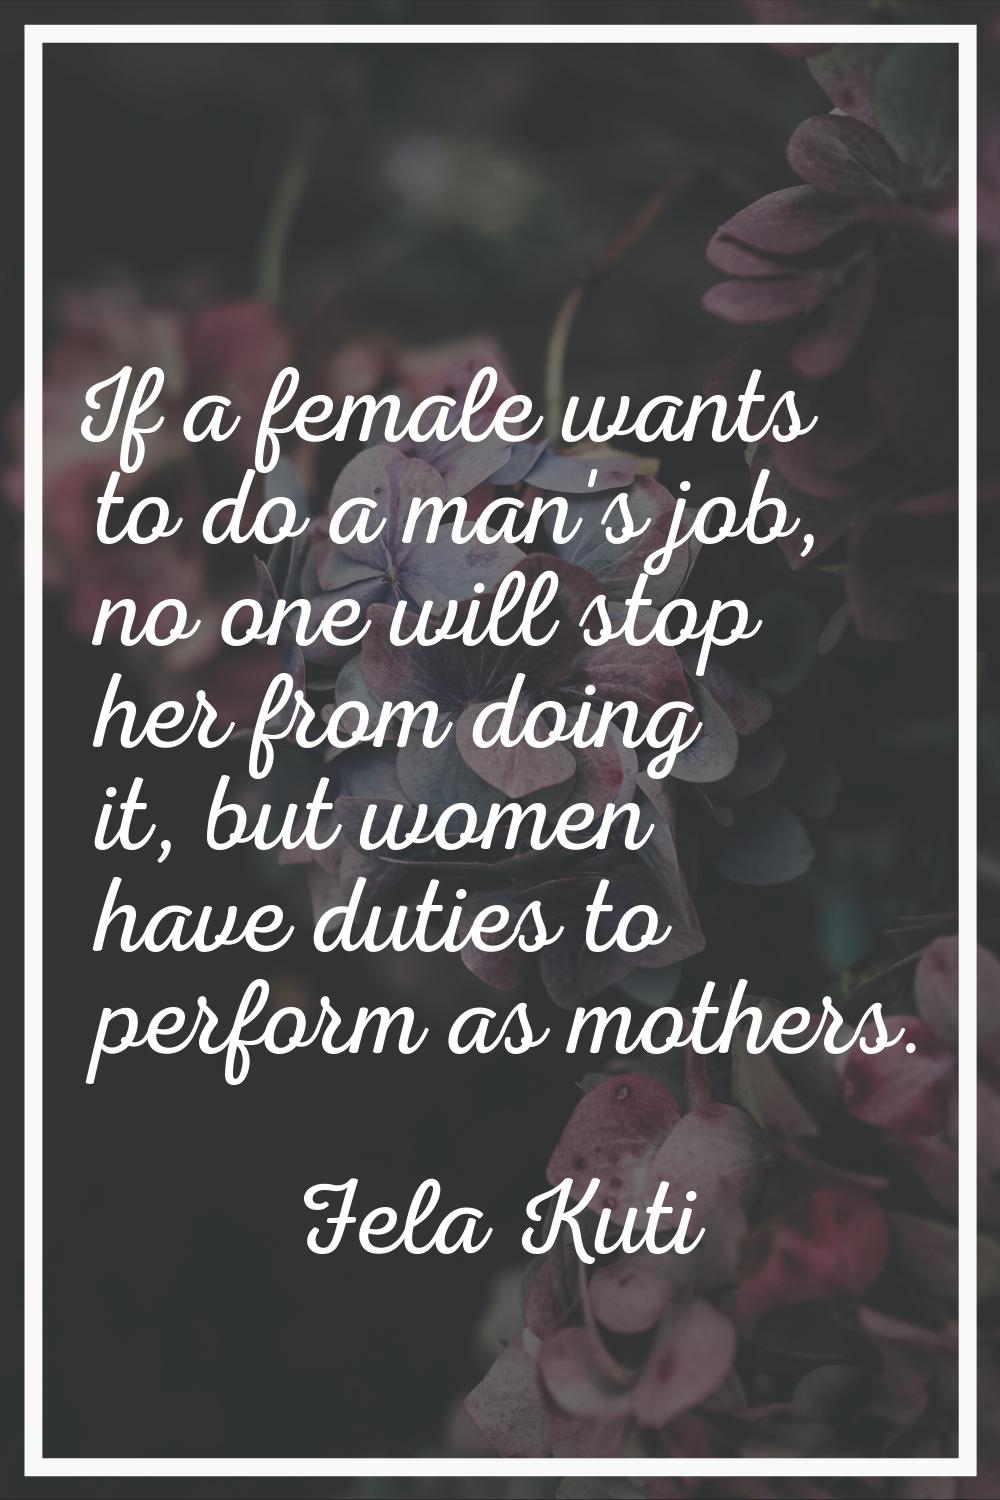 If a female wants to do a man's job, no one will stop her from doing it, but women have duties to p